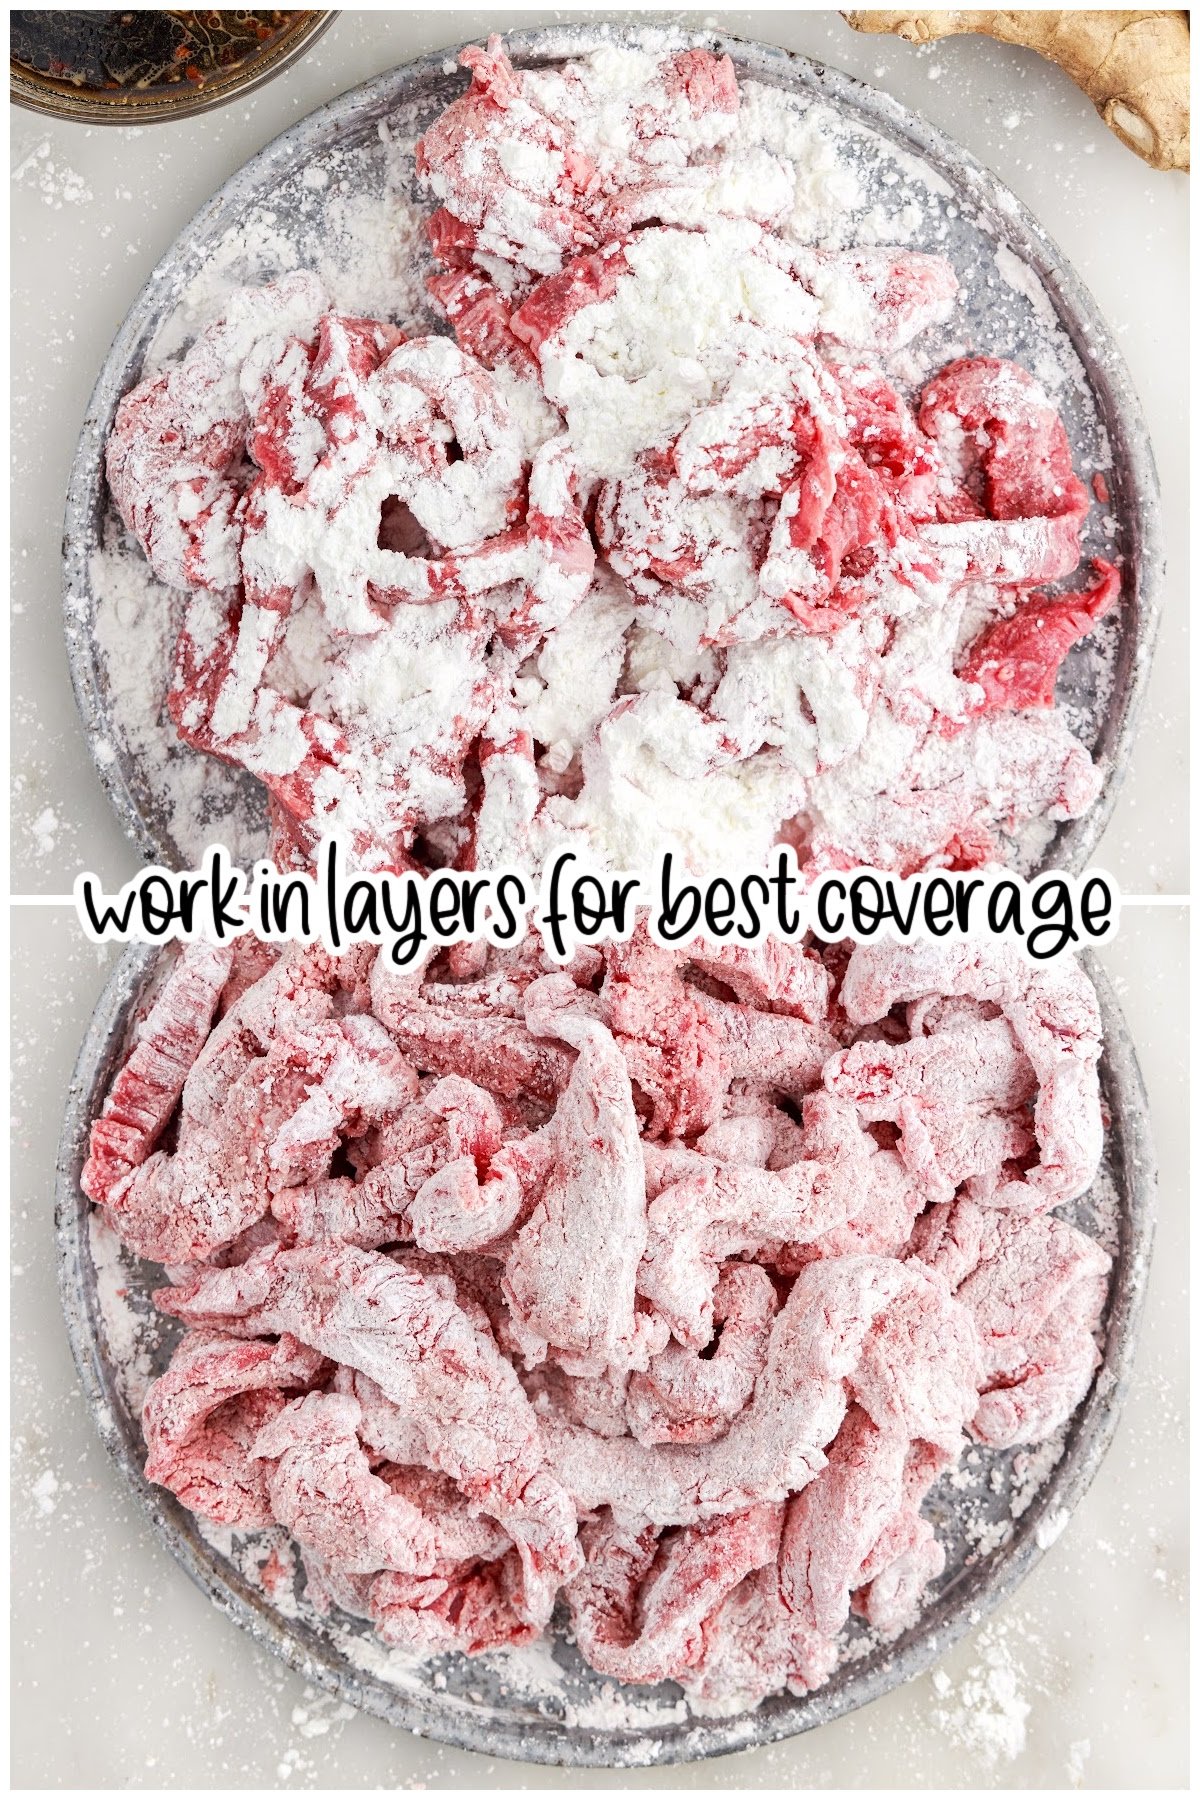 Two image of meat covered in flour with text overlay.